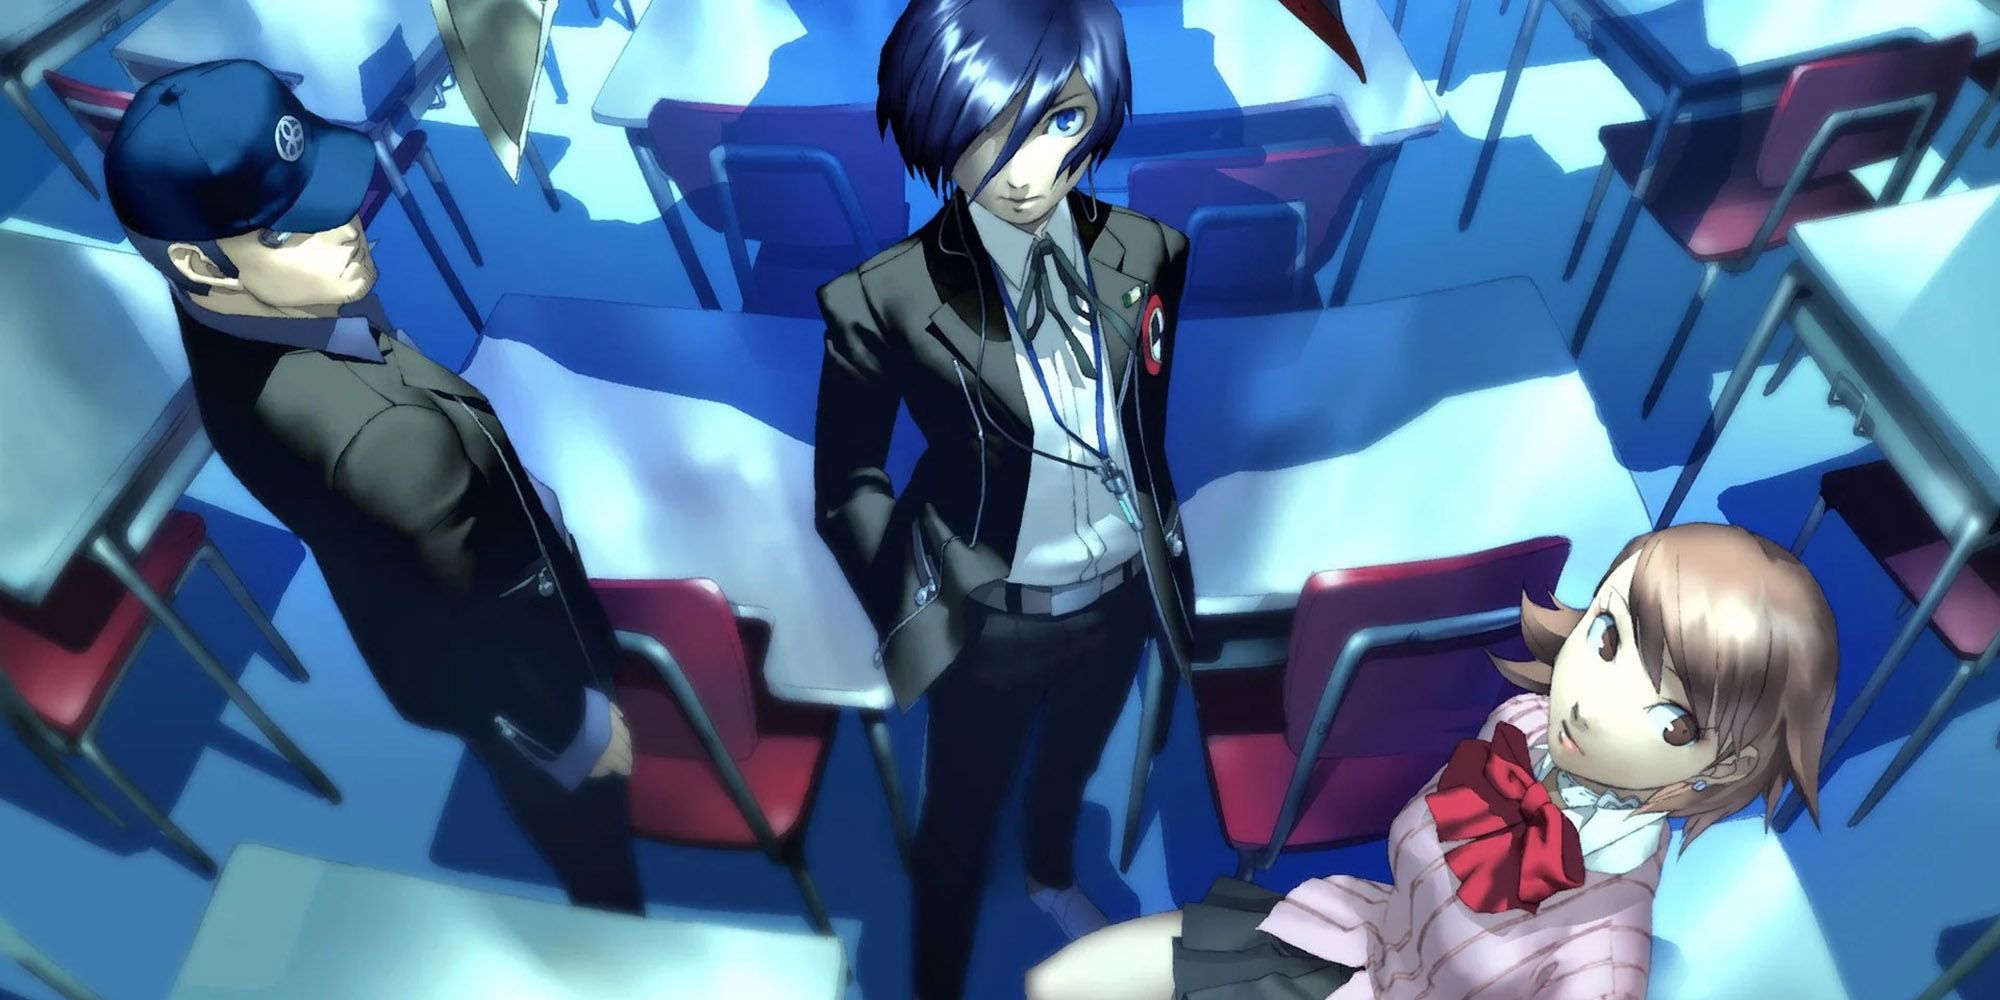 Persona 3 main characters in class